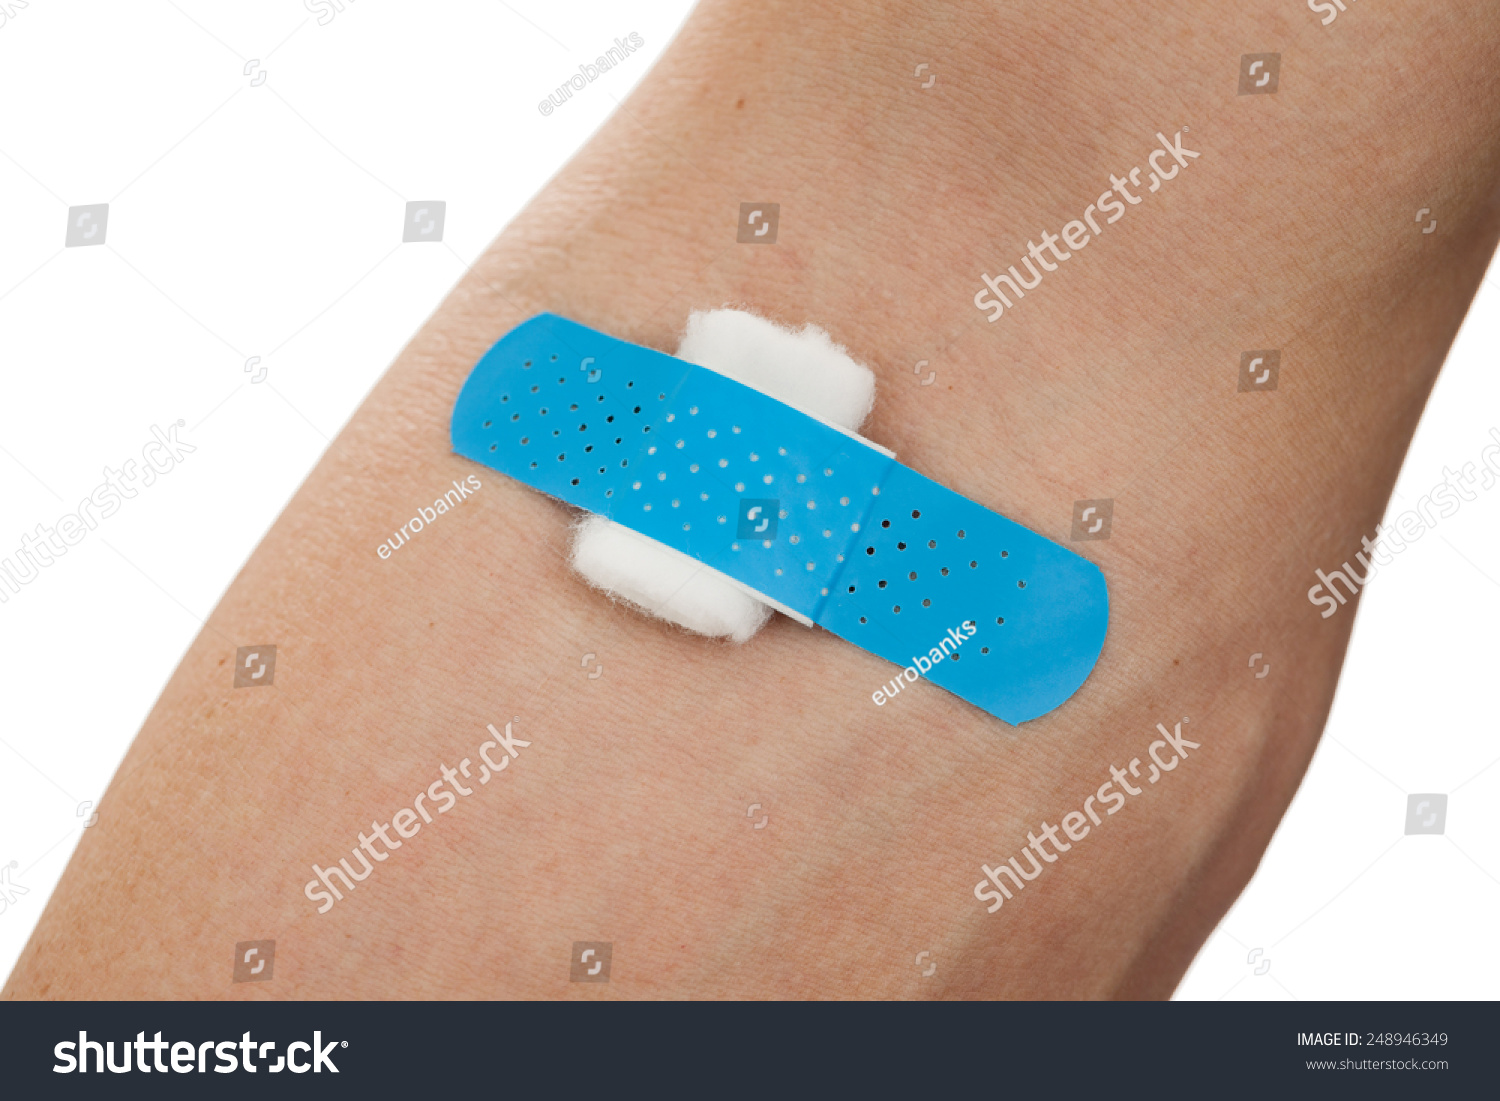 Bandage And Gauze On An Arm After A Blood Test Or Shot Isolated On A